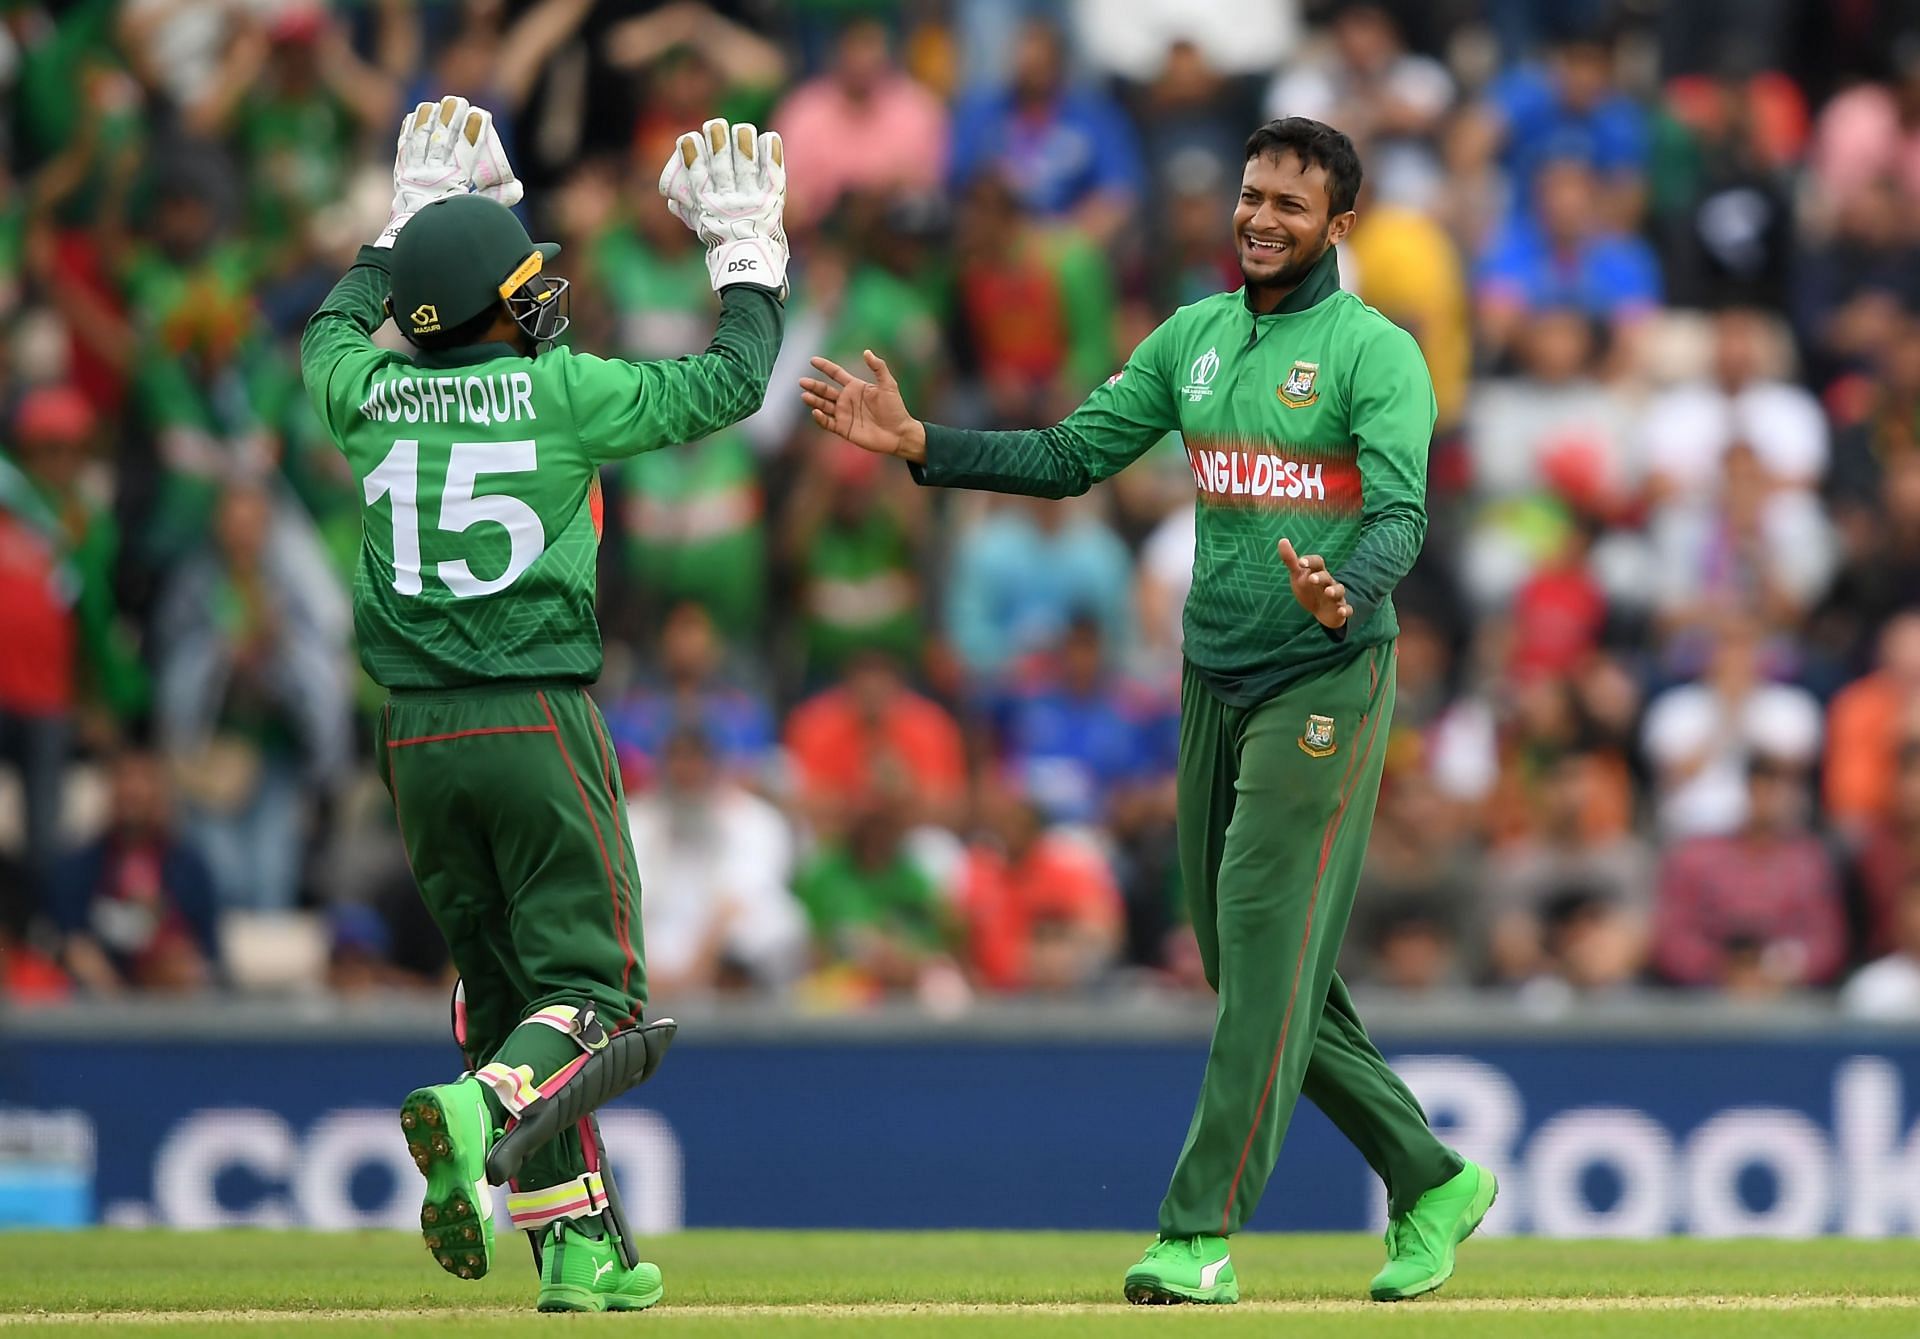 Shakib Al Hasan is now the most successful bowler in T20 World Cup history